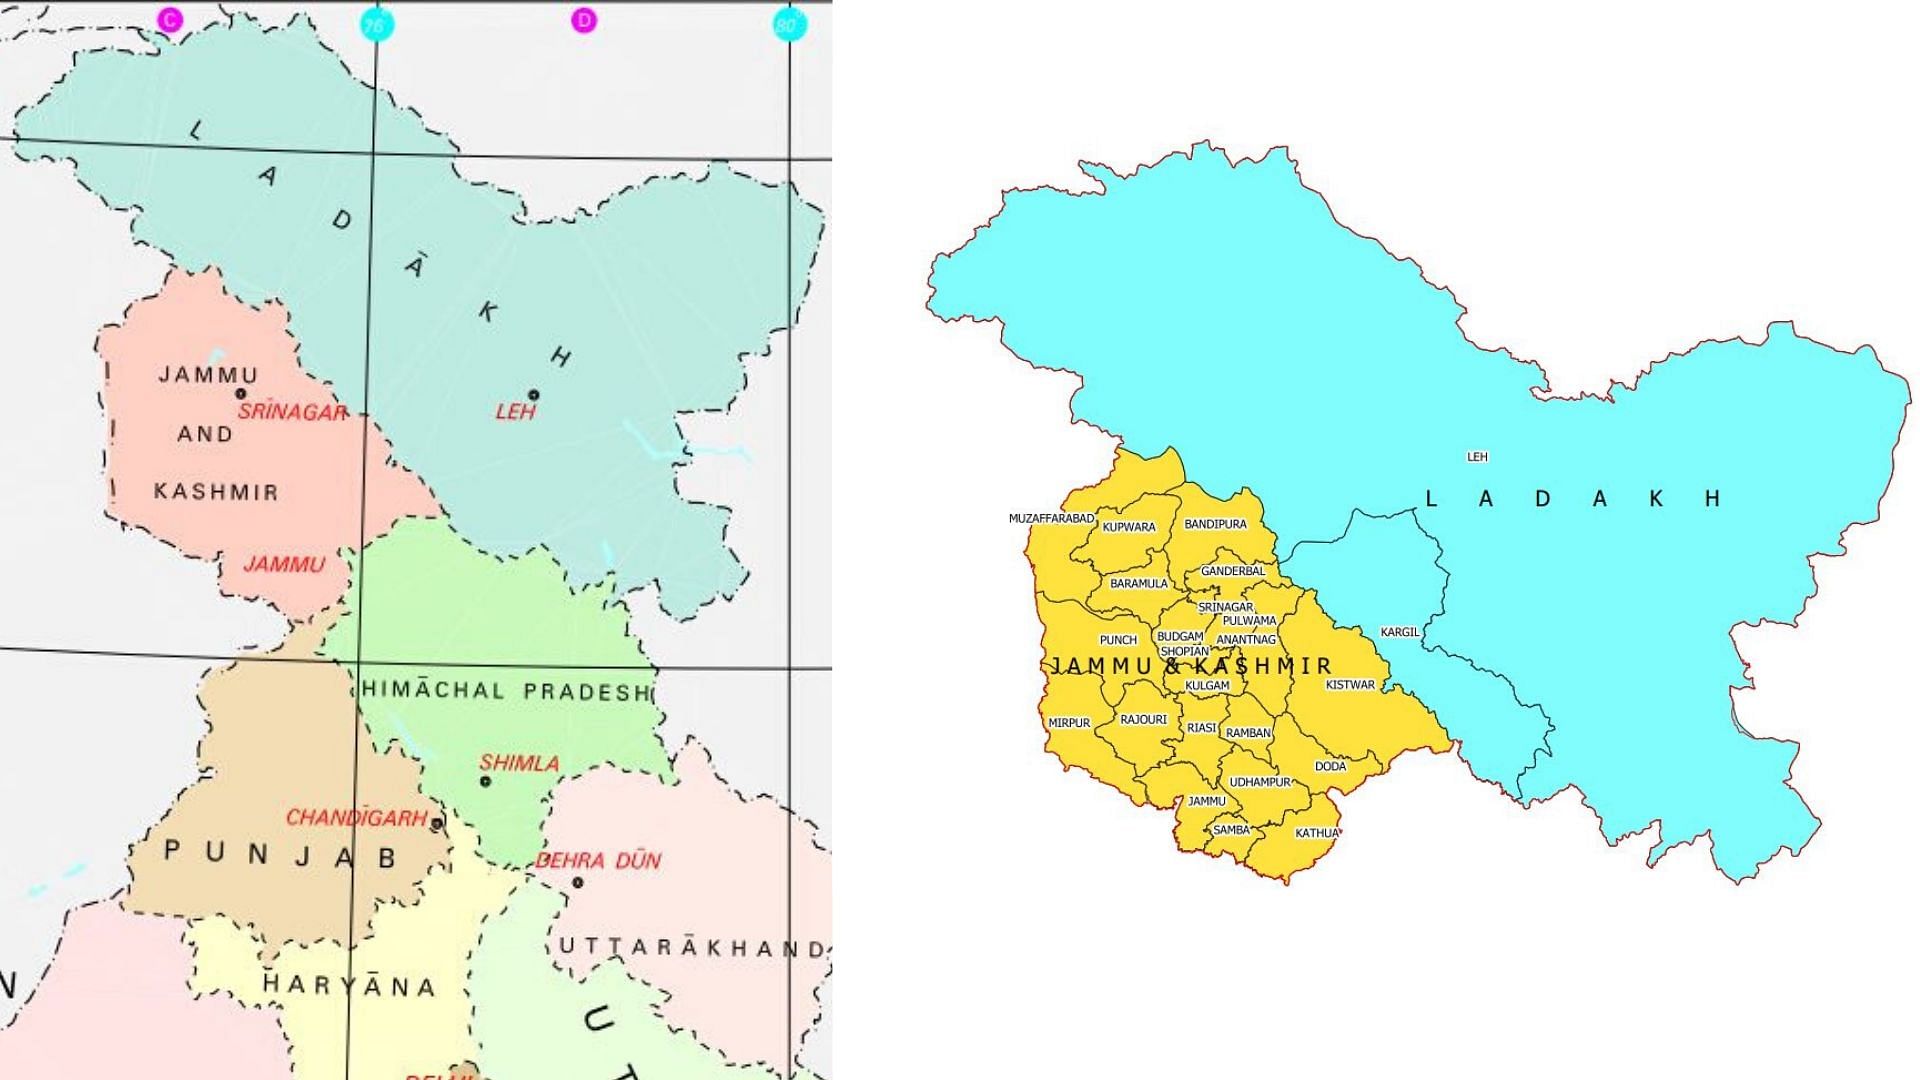 The newly-carved boundaries of UTs of Ladakh and Jammu and Kashmir.